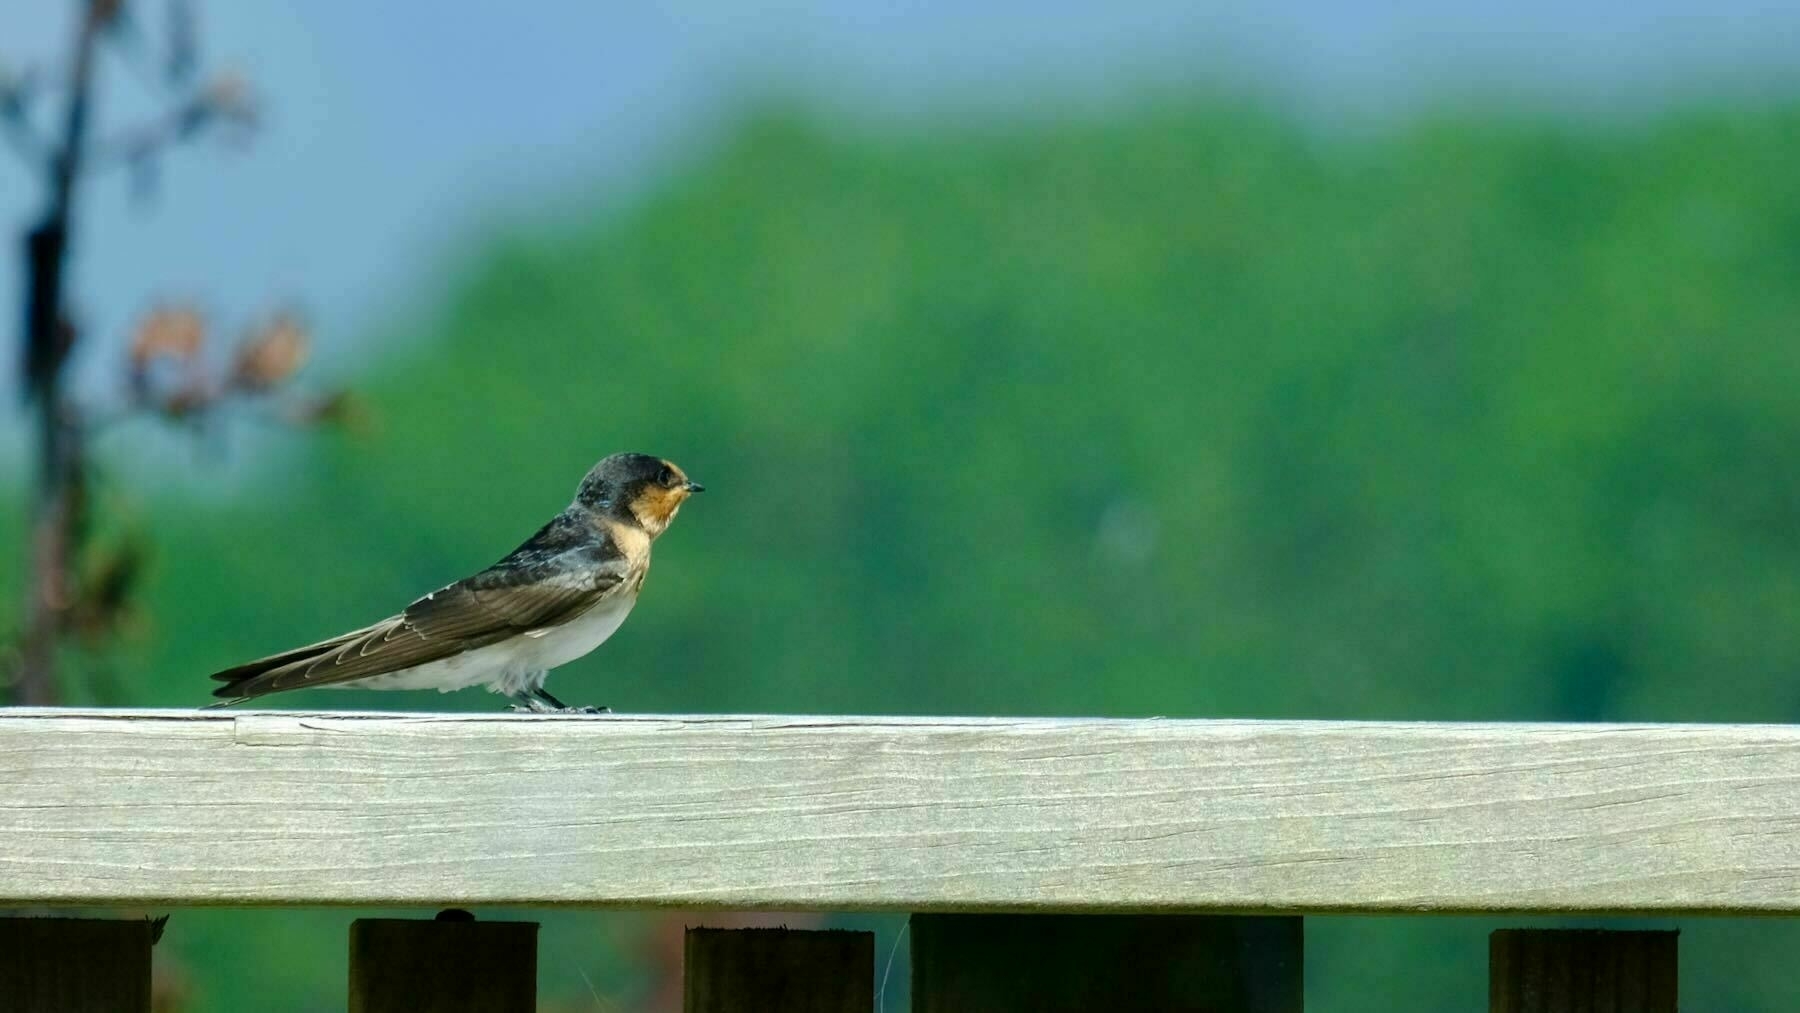 Swallow on the railing  4